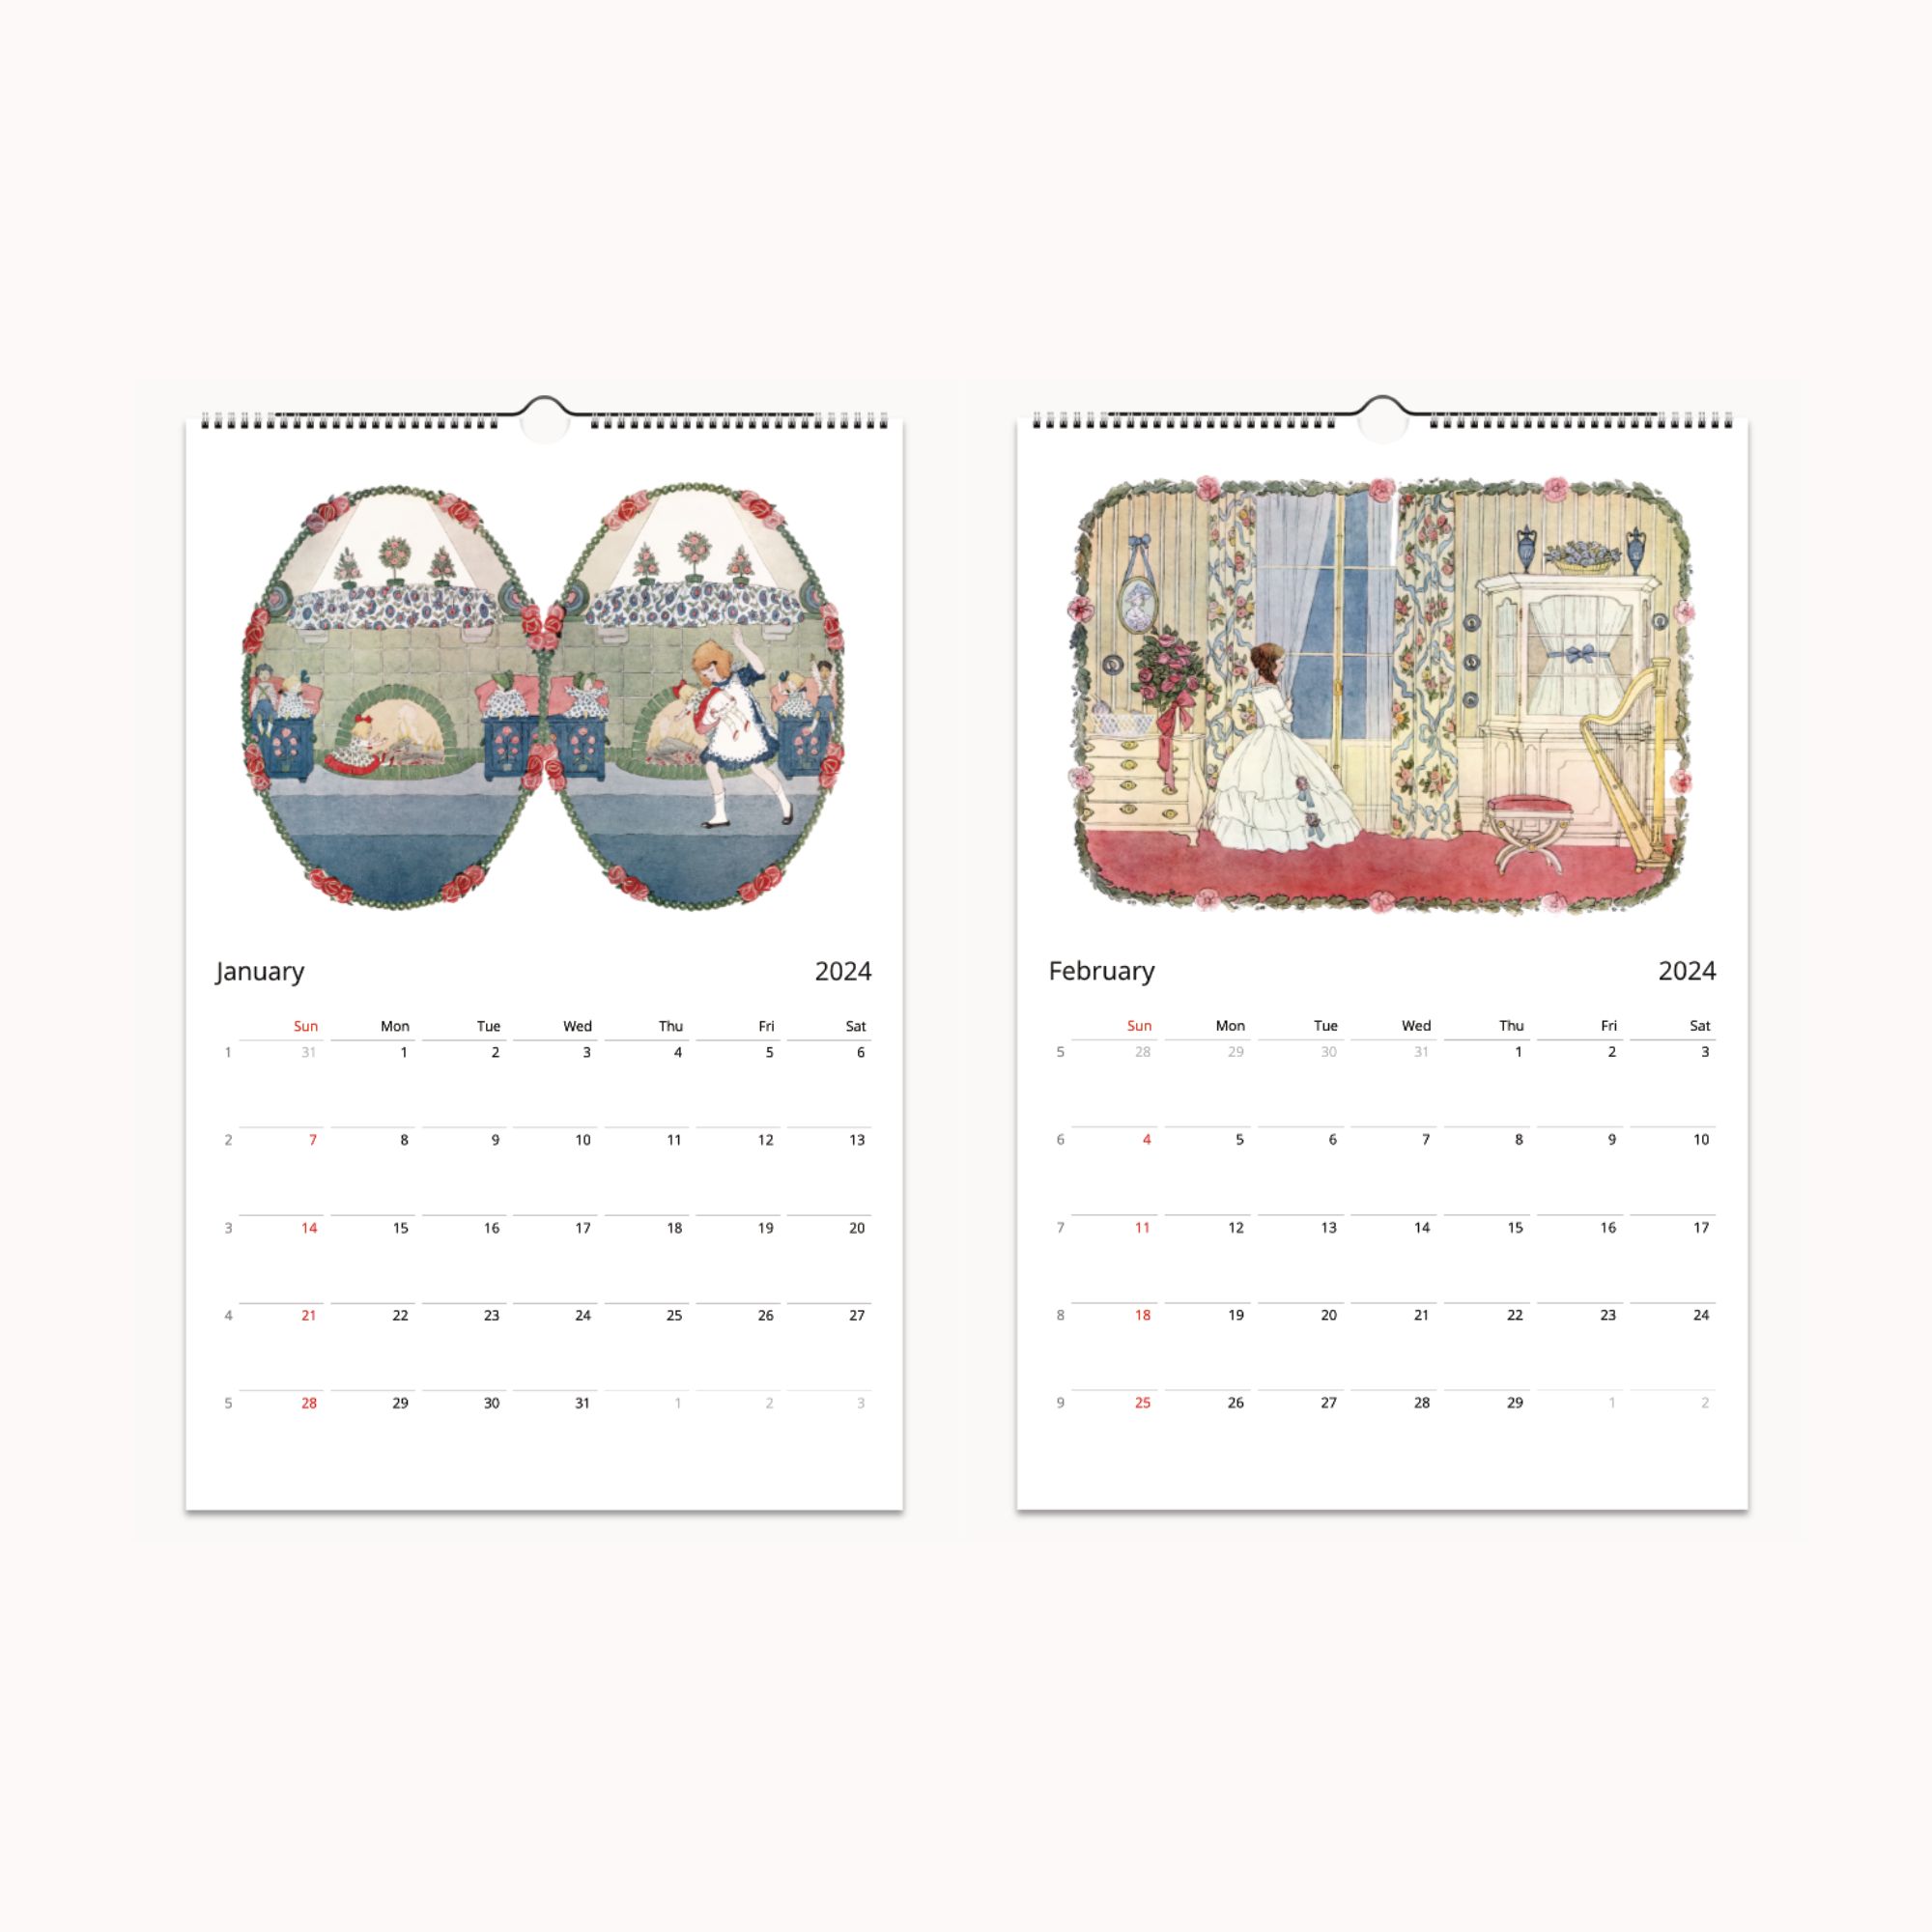 2024 Wall Calendar featuring the charming children's illustrations of Henriëtte Willebeek le Mair, with space for personal notes, perfect for gifting and preserving timeless art.